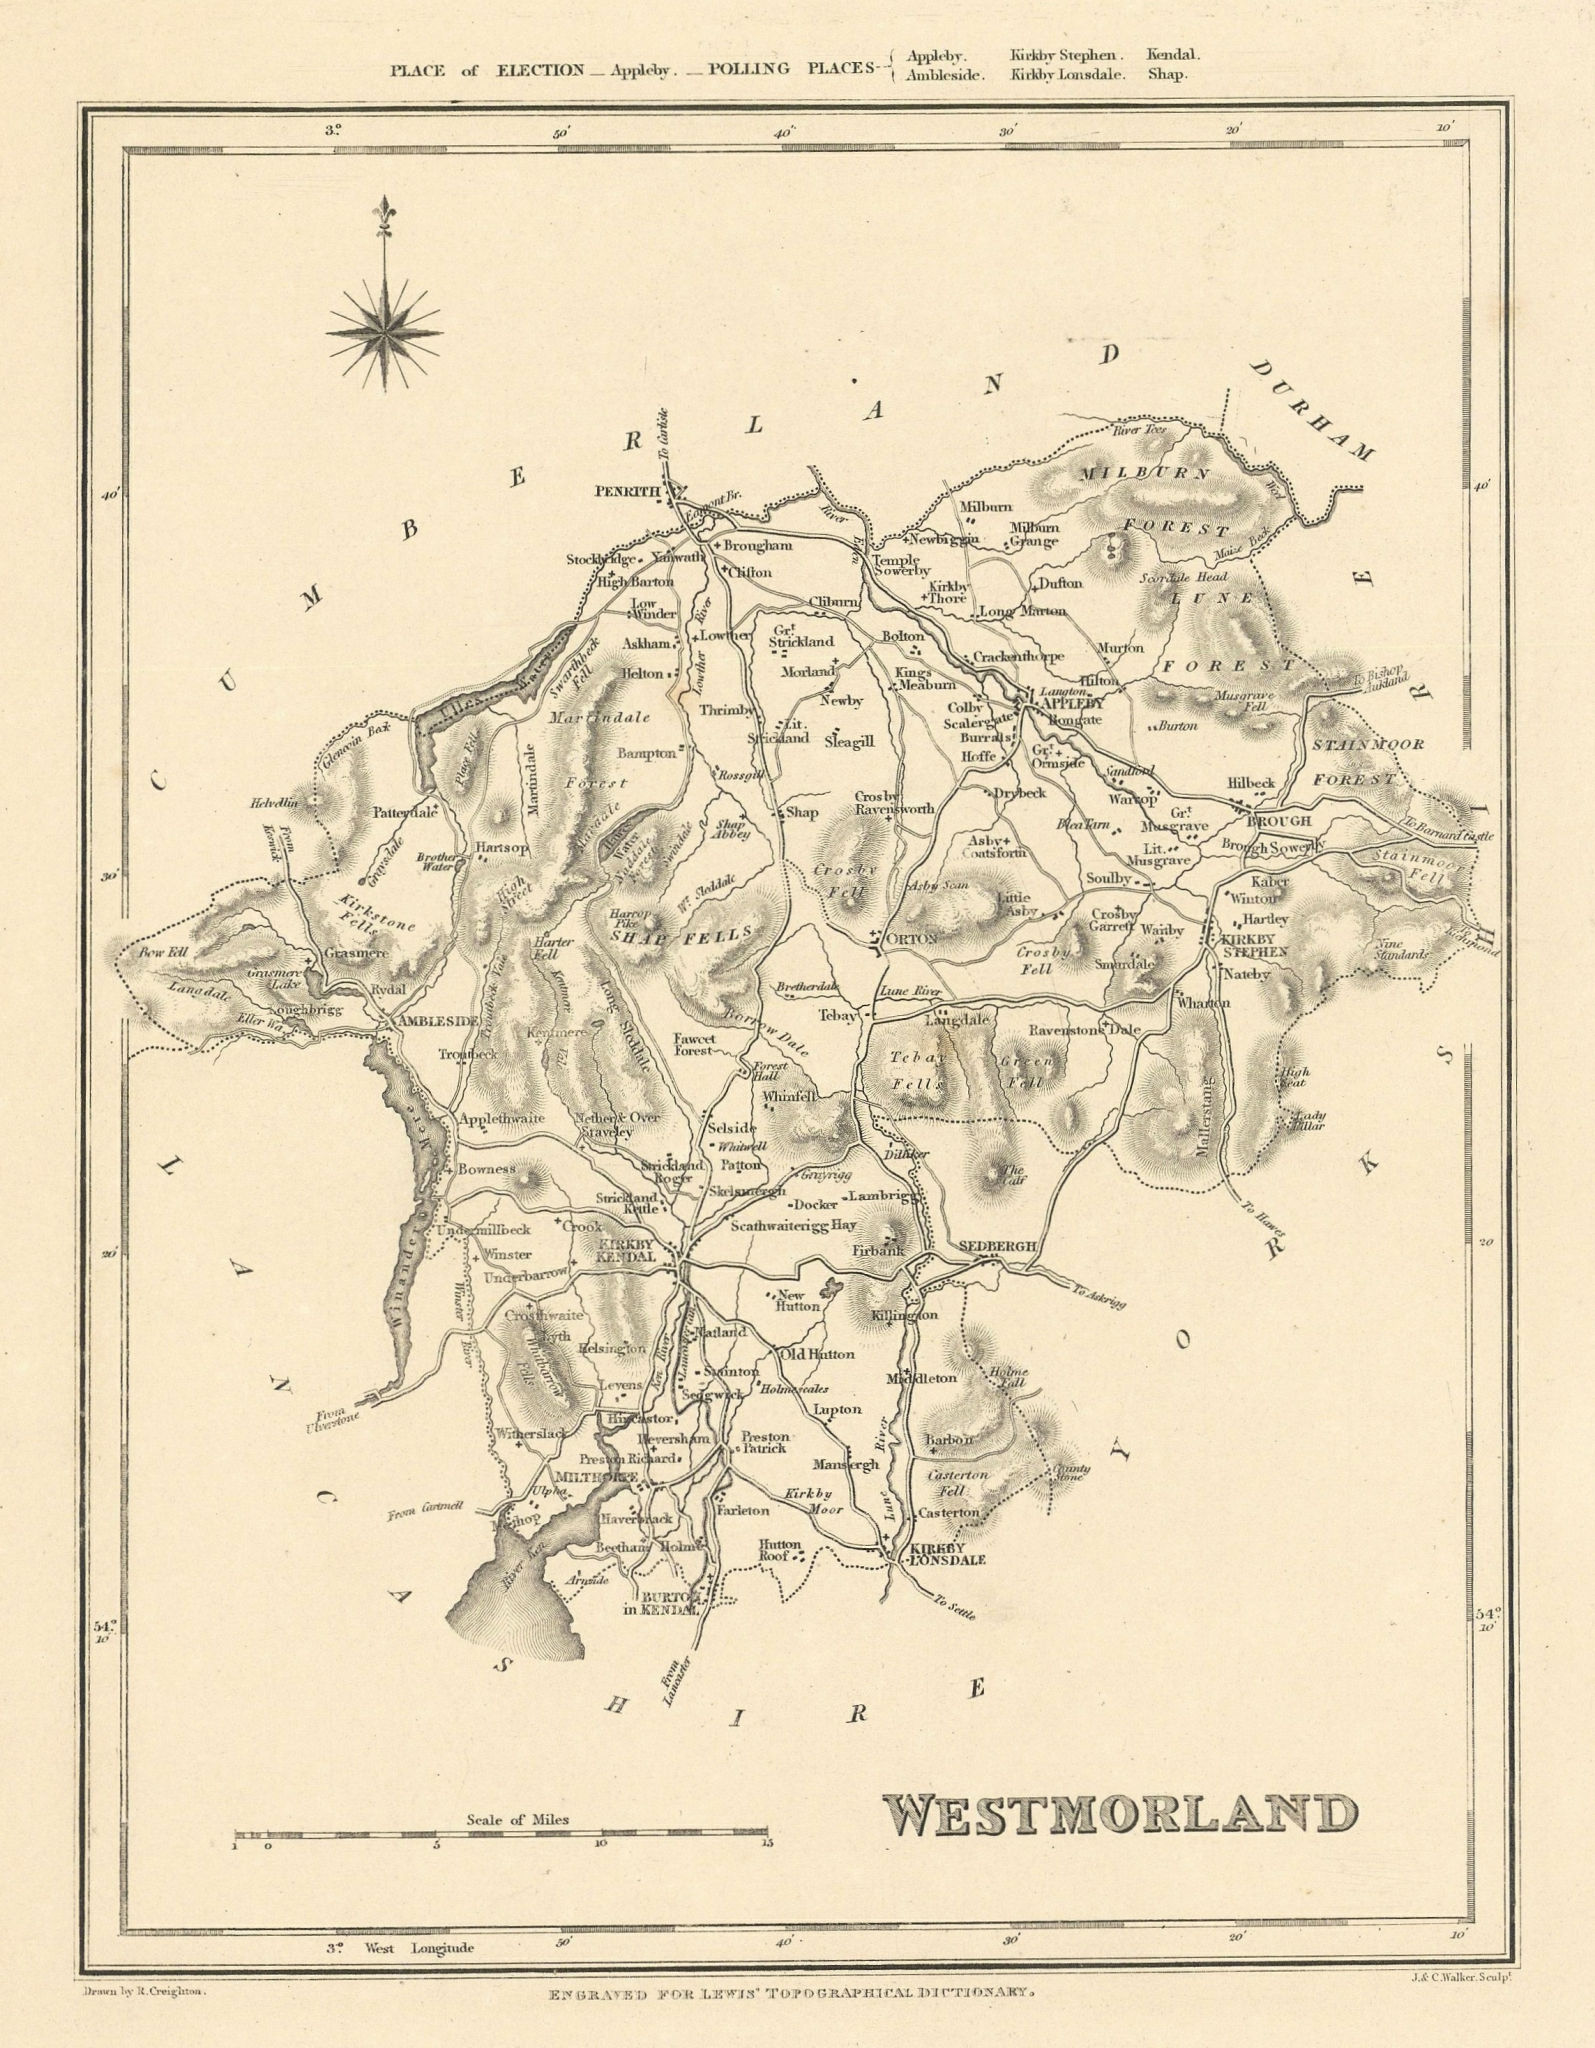 Associate Product Antique county map of WESTMORLAND by Walker Creighton Lewis. Lake District c1840